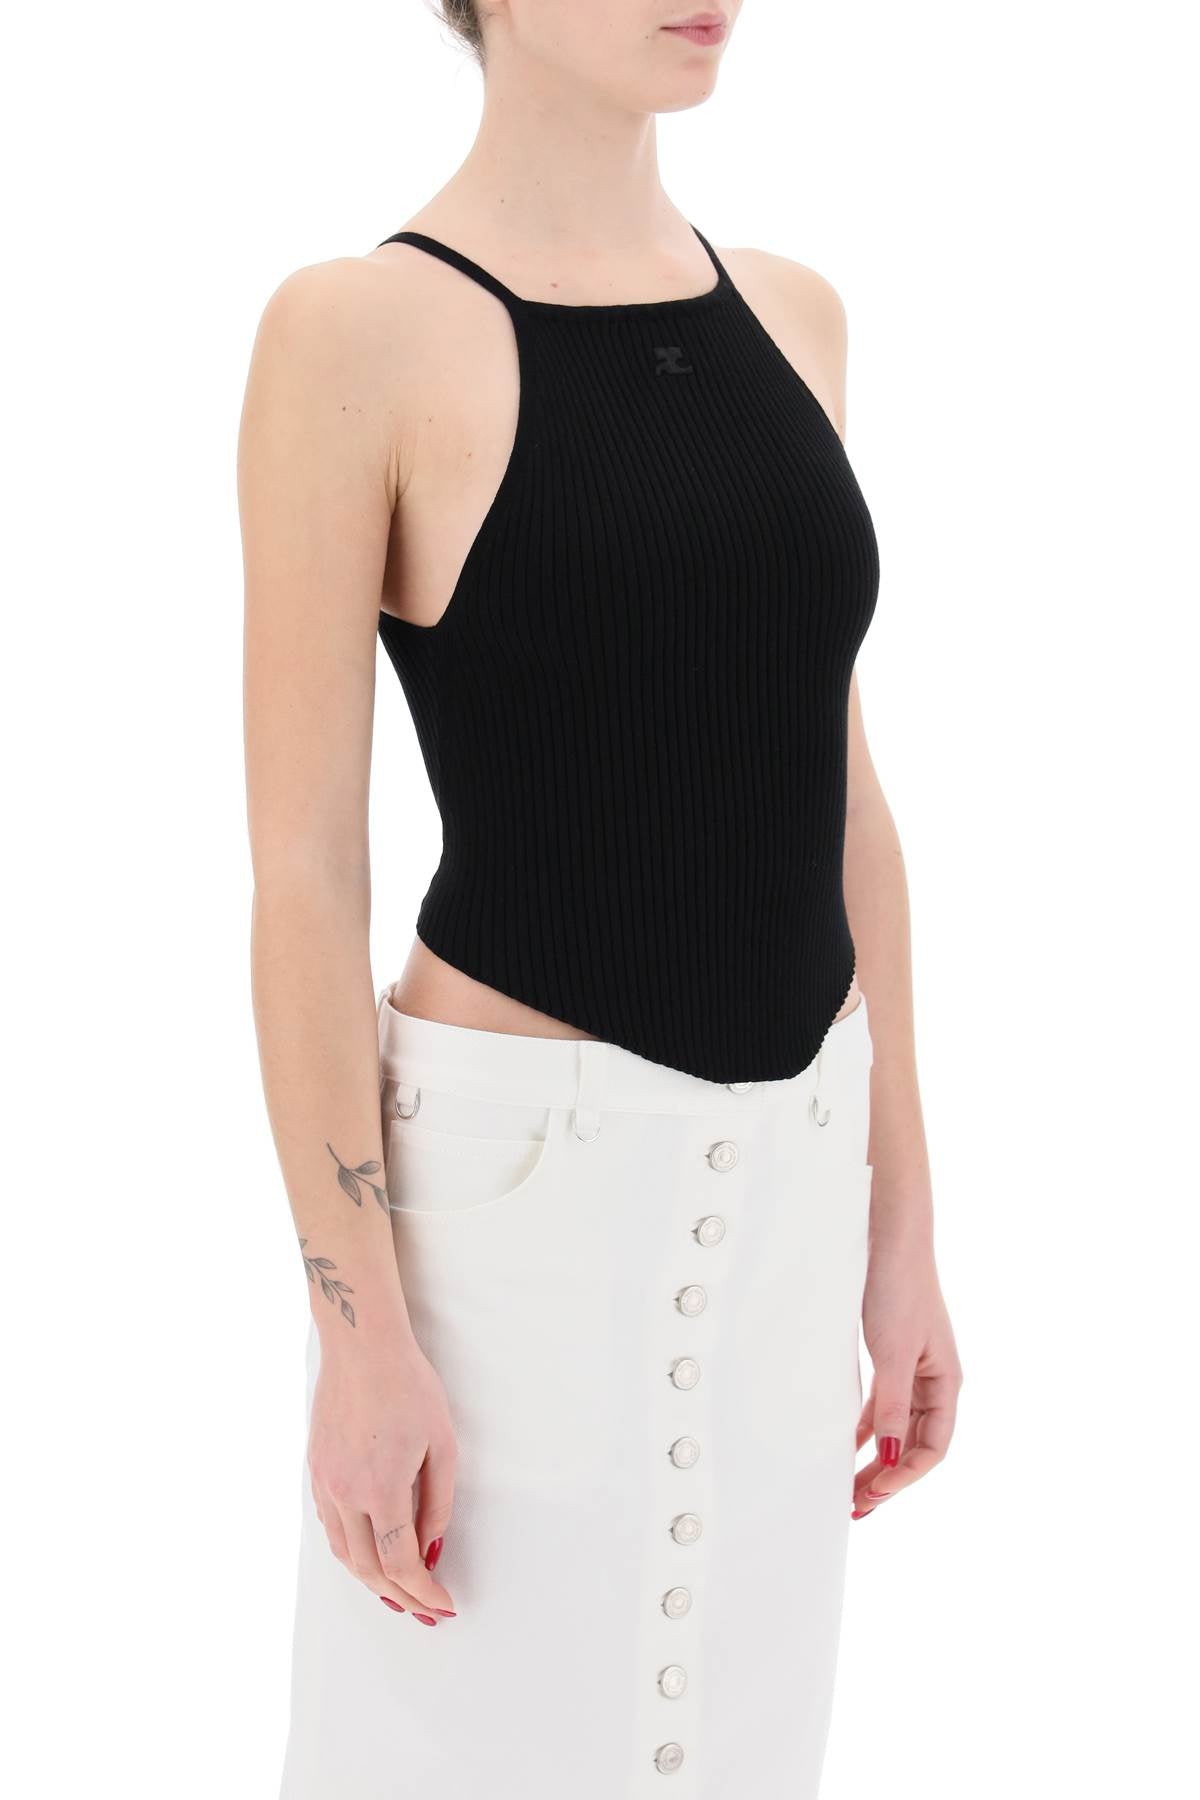 Courreges "ribbed knit holistic top-1